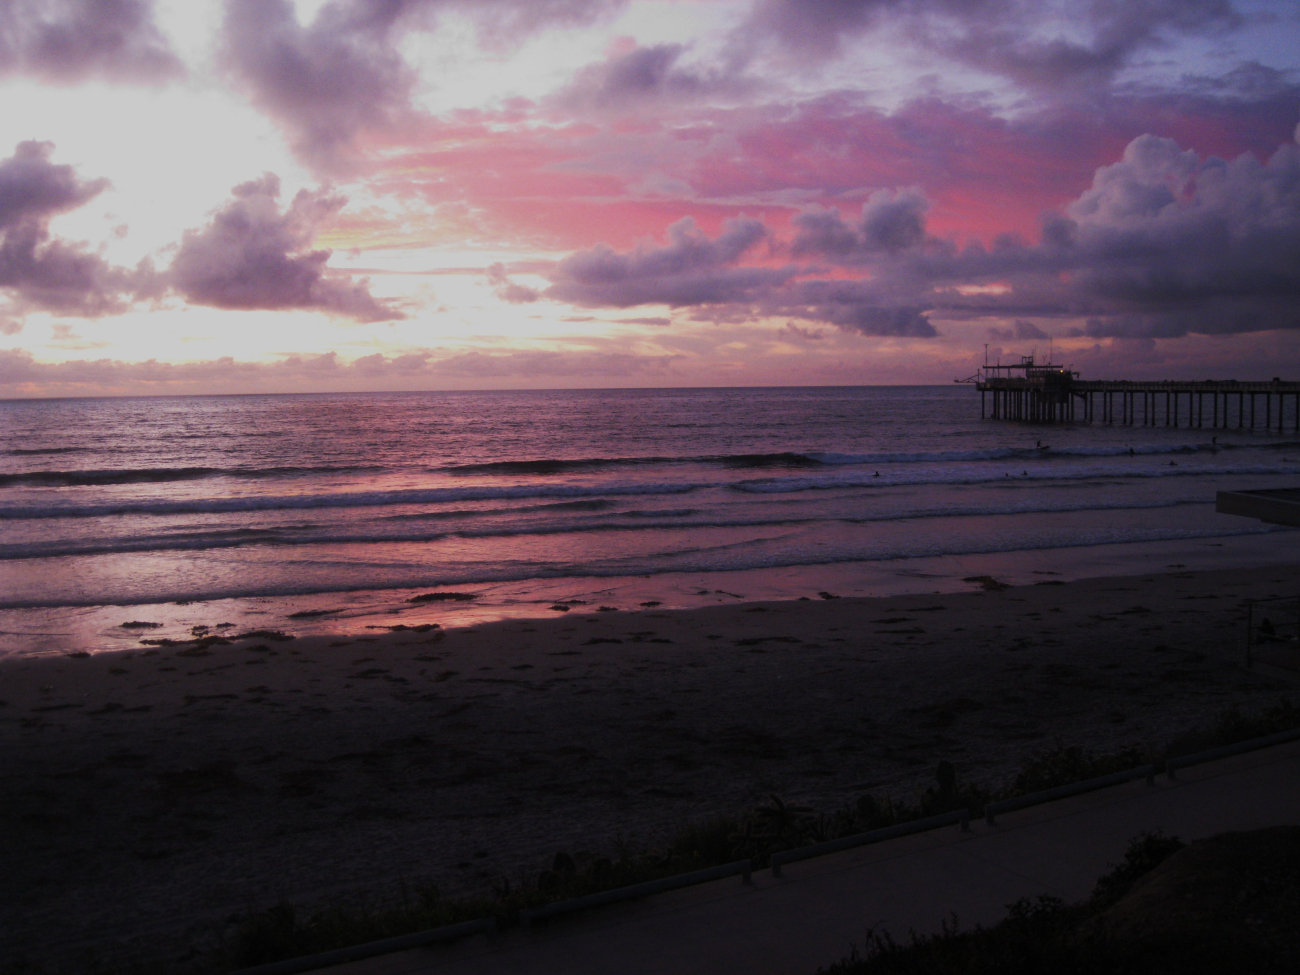 The end of day at Scripps Institution of Oceanography - the last surfers haveleft the water and the waves roll in unridden